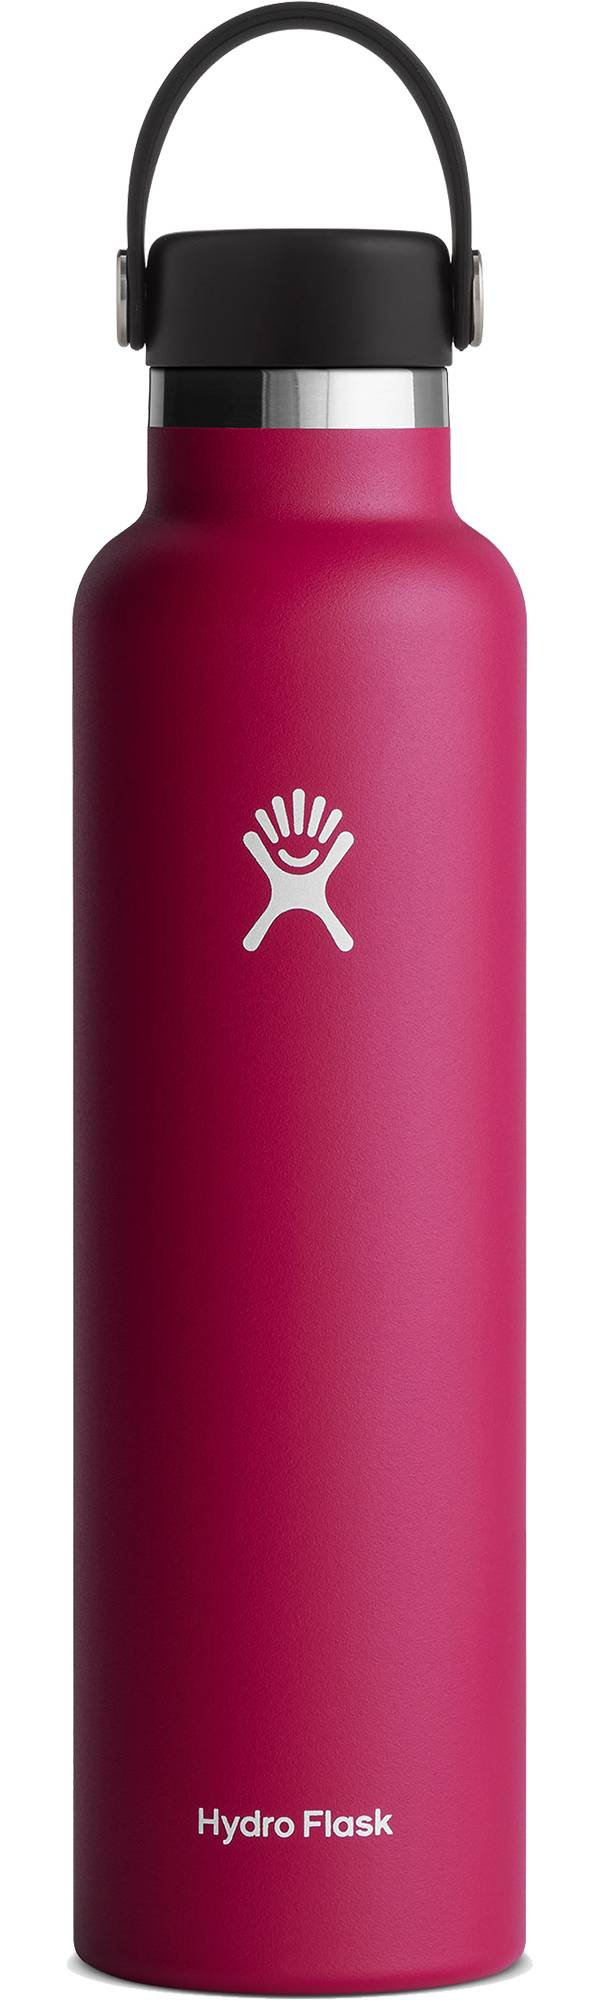 Hydro Flask 24 oz Standard Mouth Bottle product image